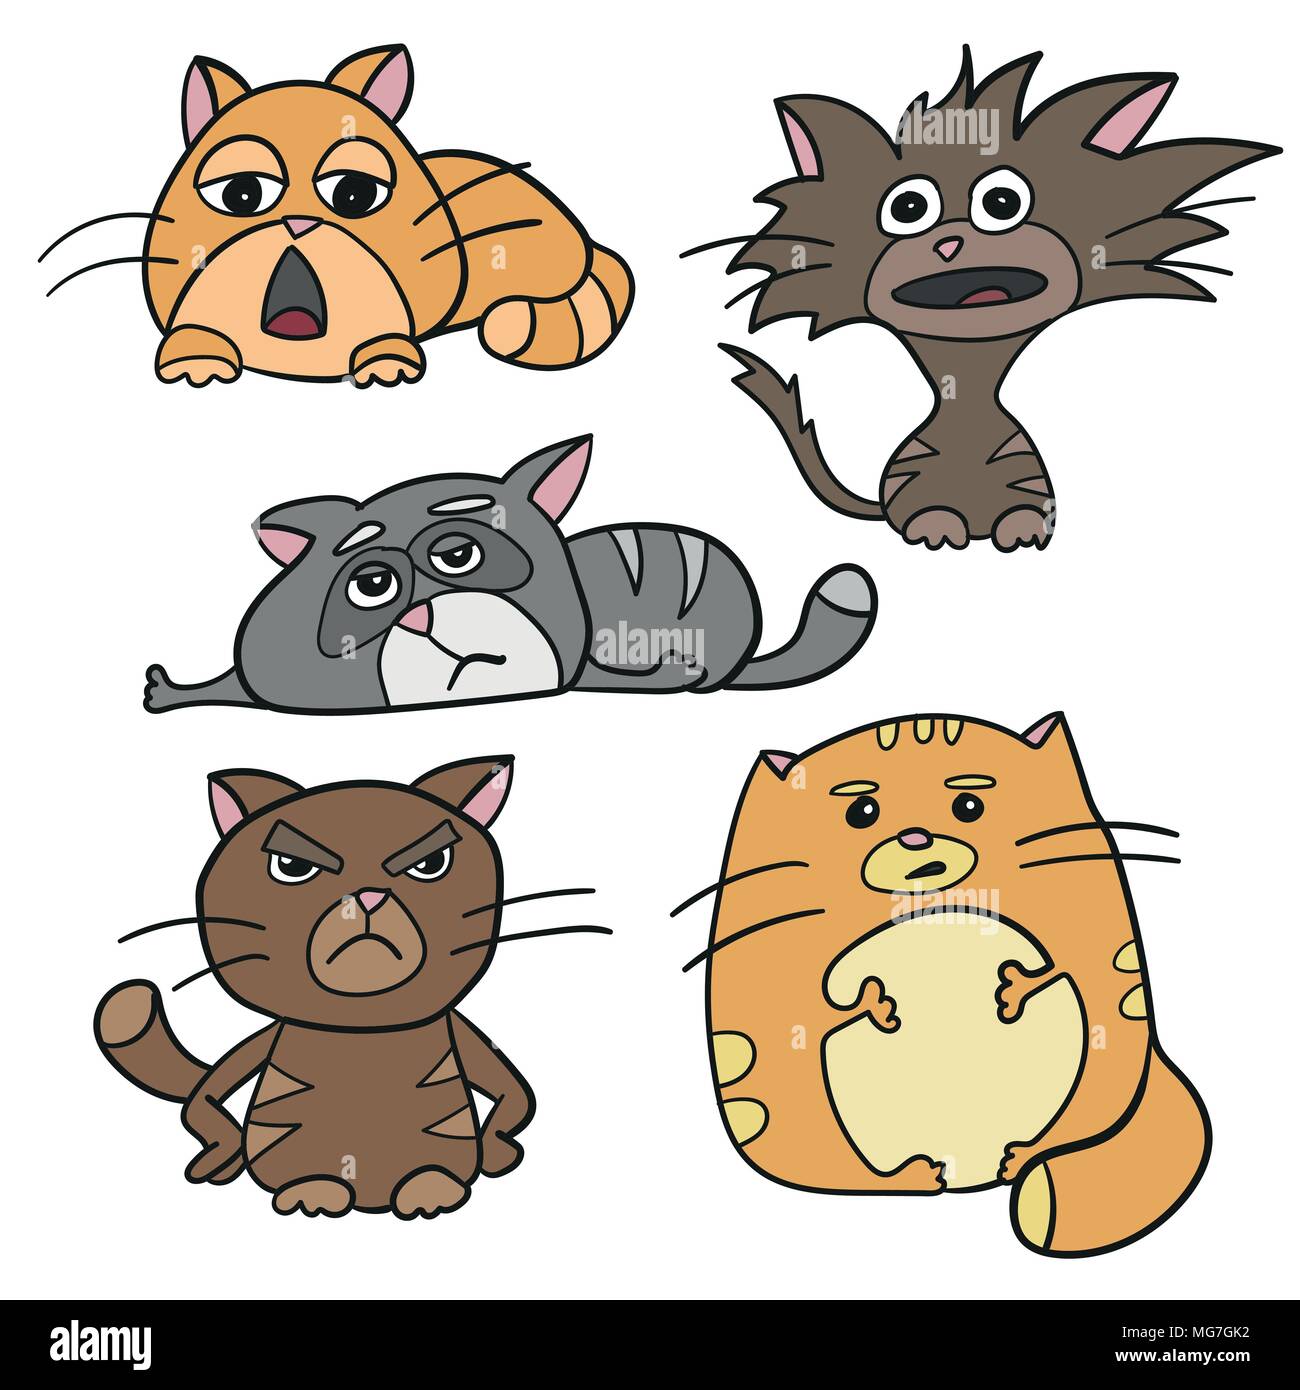 Cute Cat characters fat, angry, sleepy, crazy, sad emotion. Set of vector Stock Vector